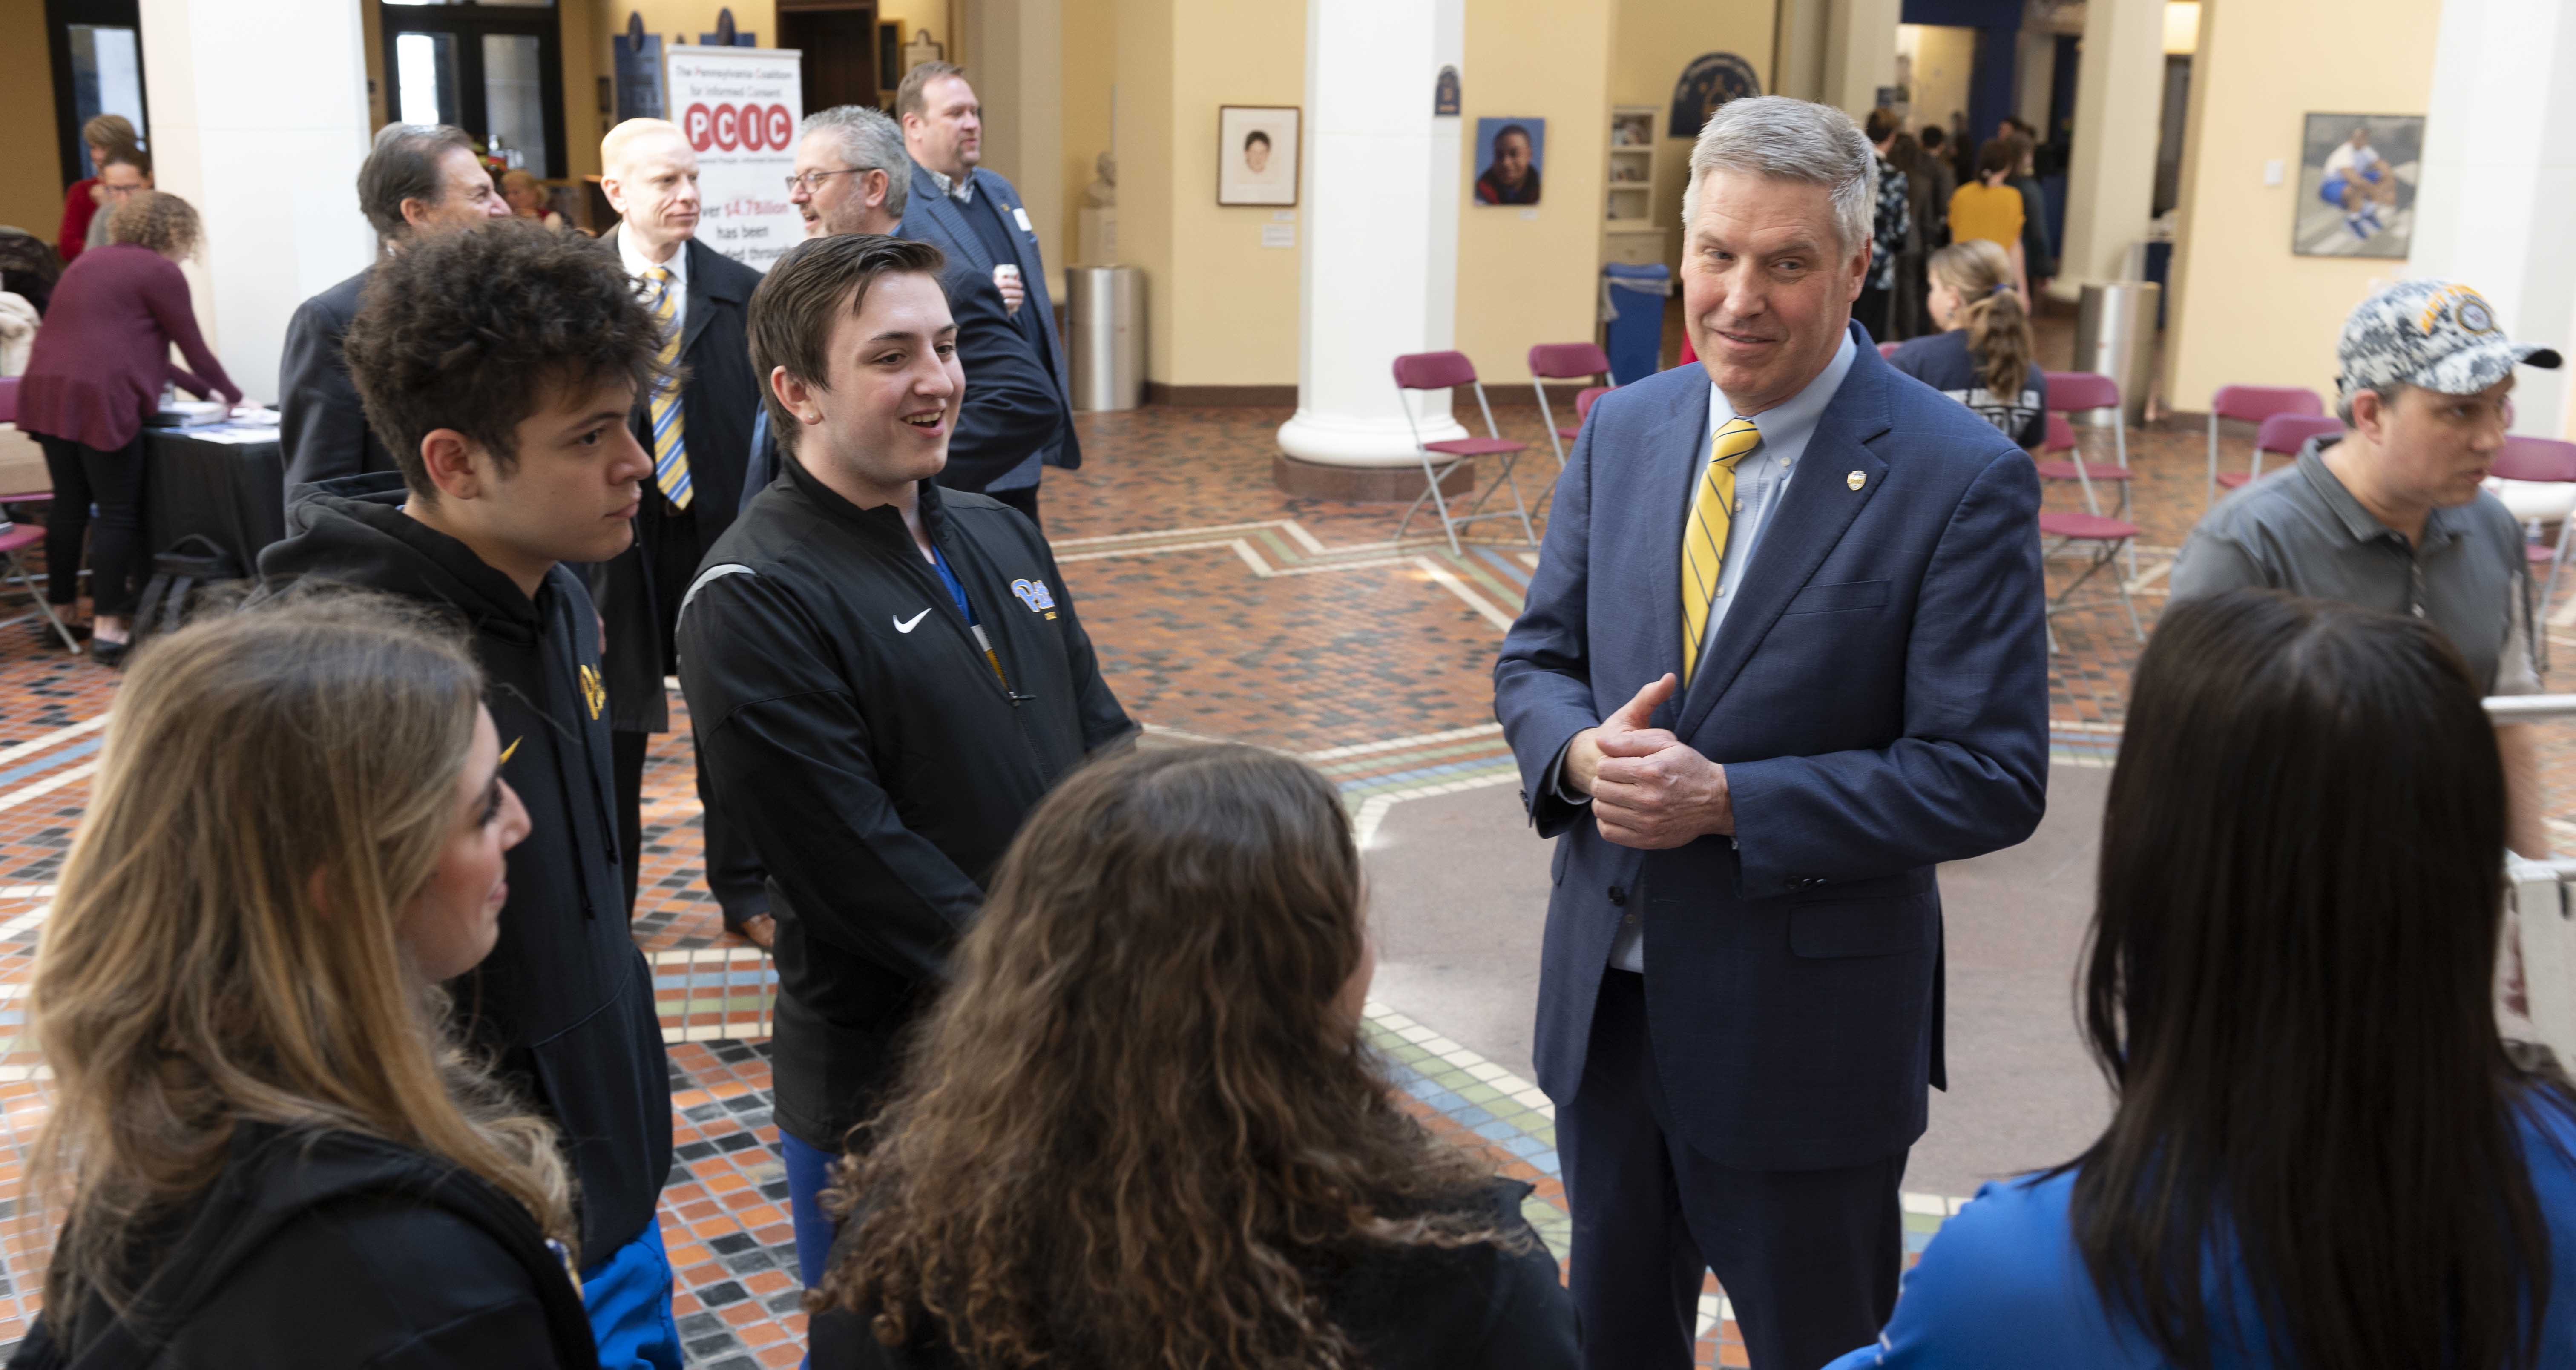 Chancellor Gallagher talks to students